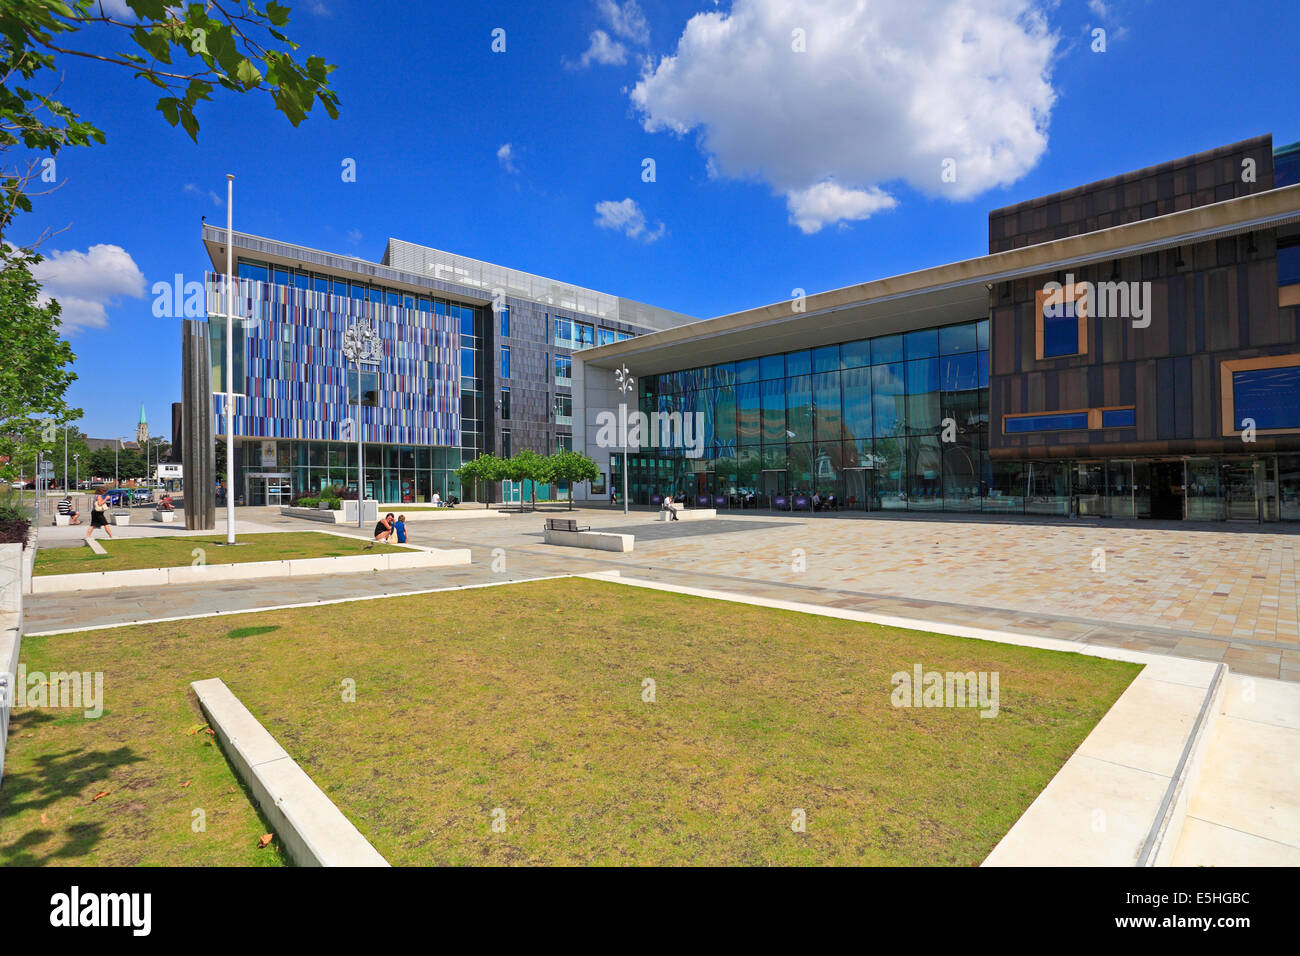 Sir Nigel Gresley Square, Civic Office and Cast Performance Venue, Waterdale, Doncaster, South Yorkshire, England, UK. Stock Photo